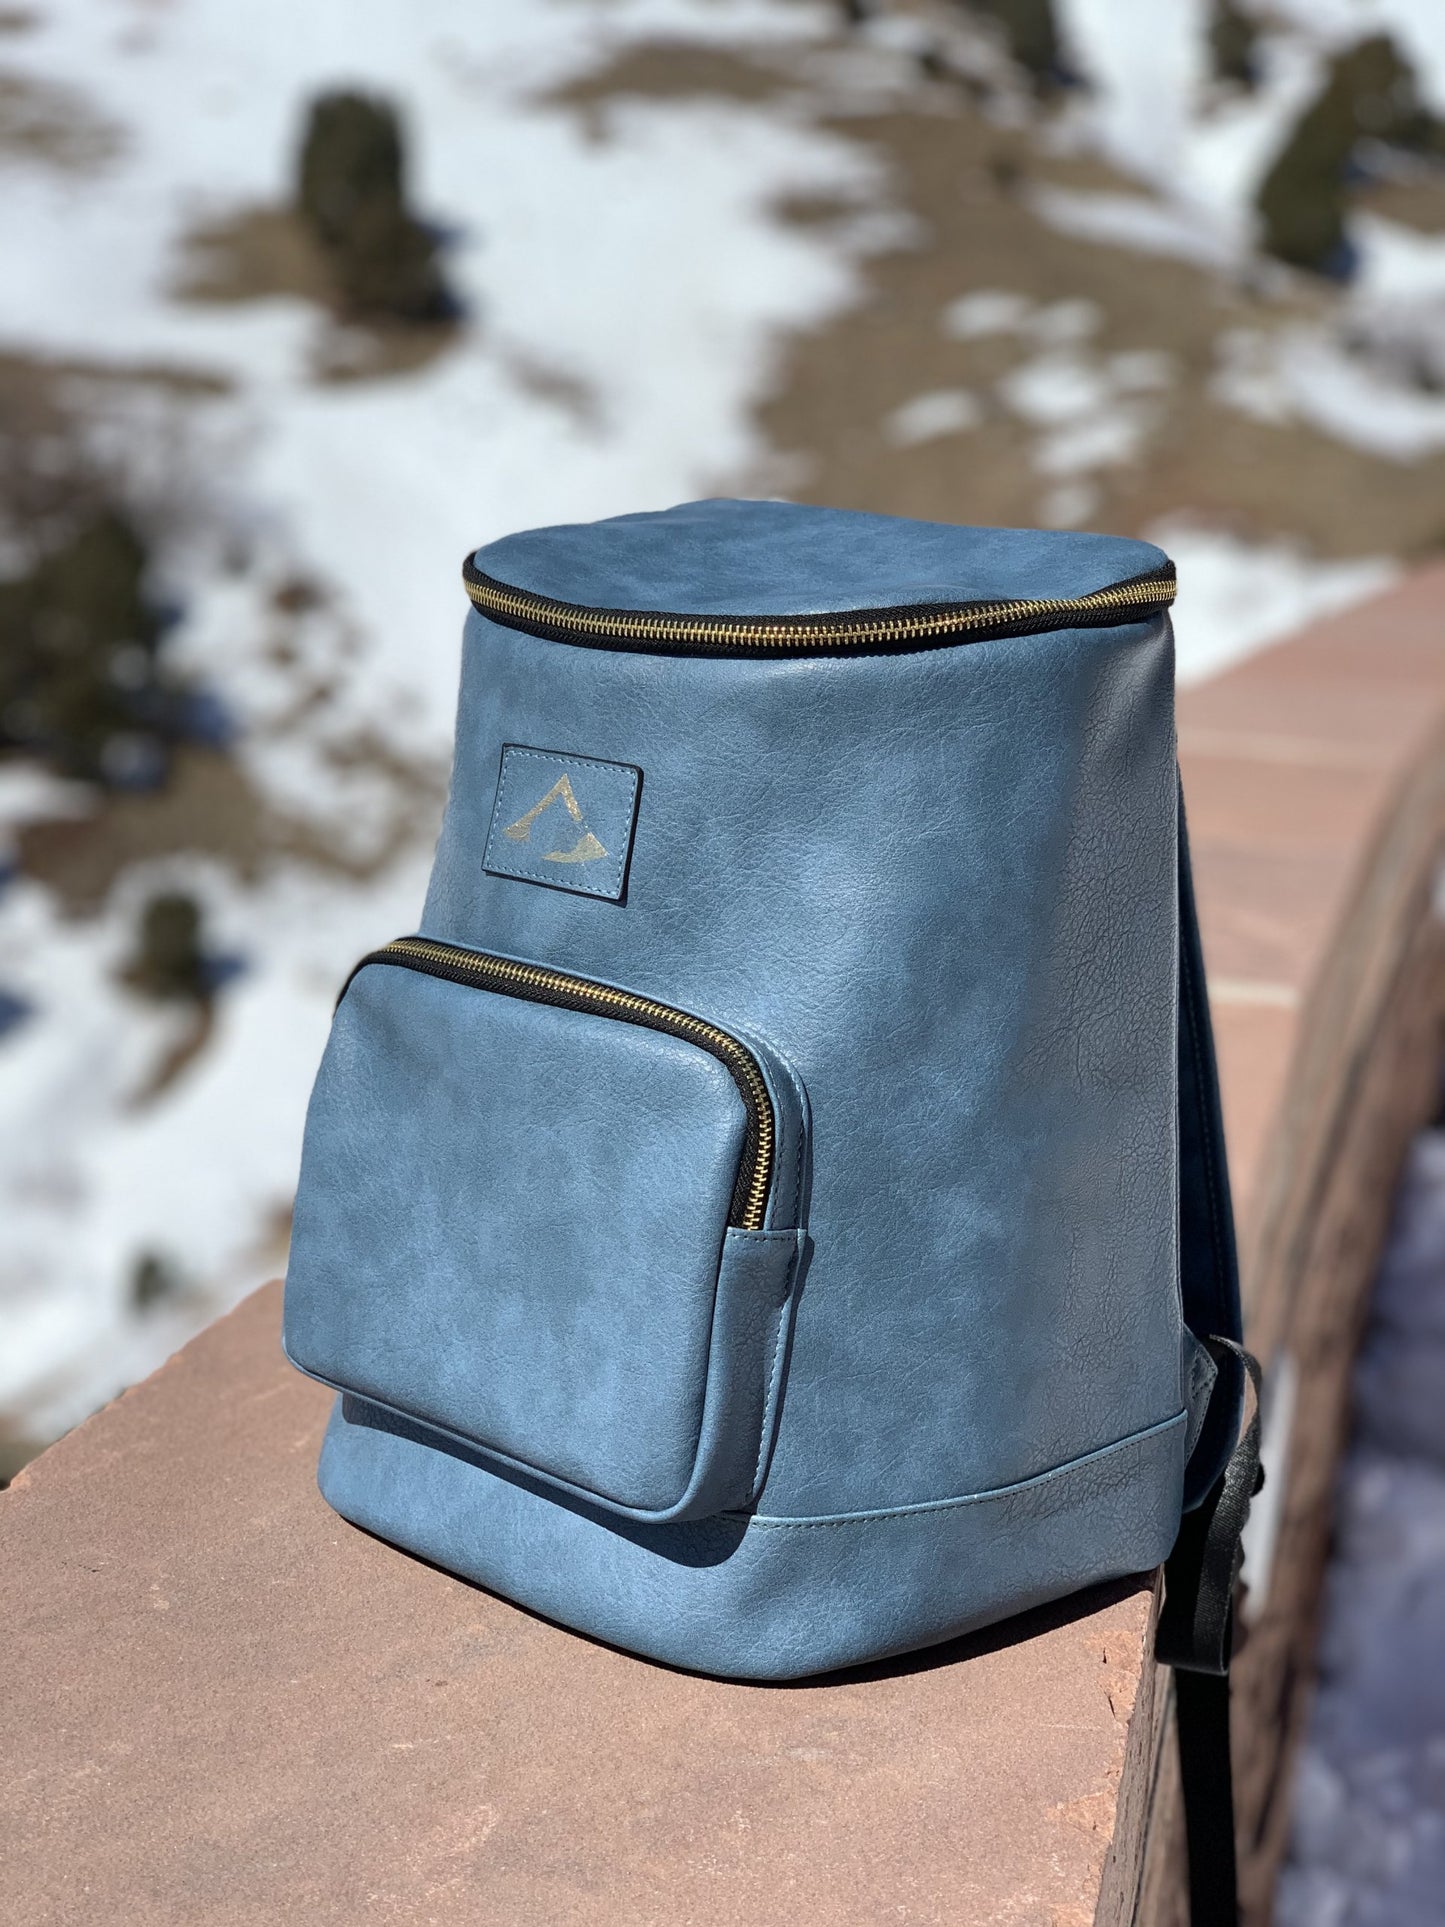 Leakproof thick-insulated backpack cooler, vegan leather